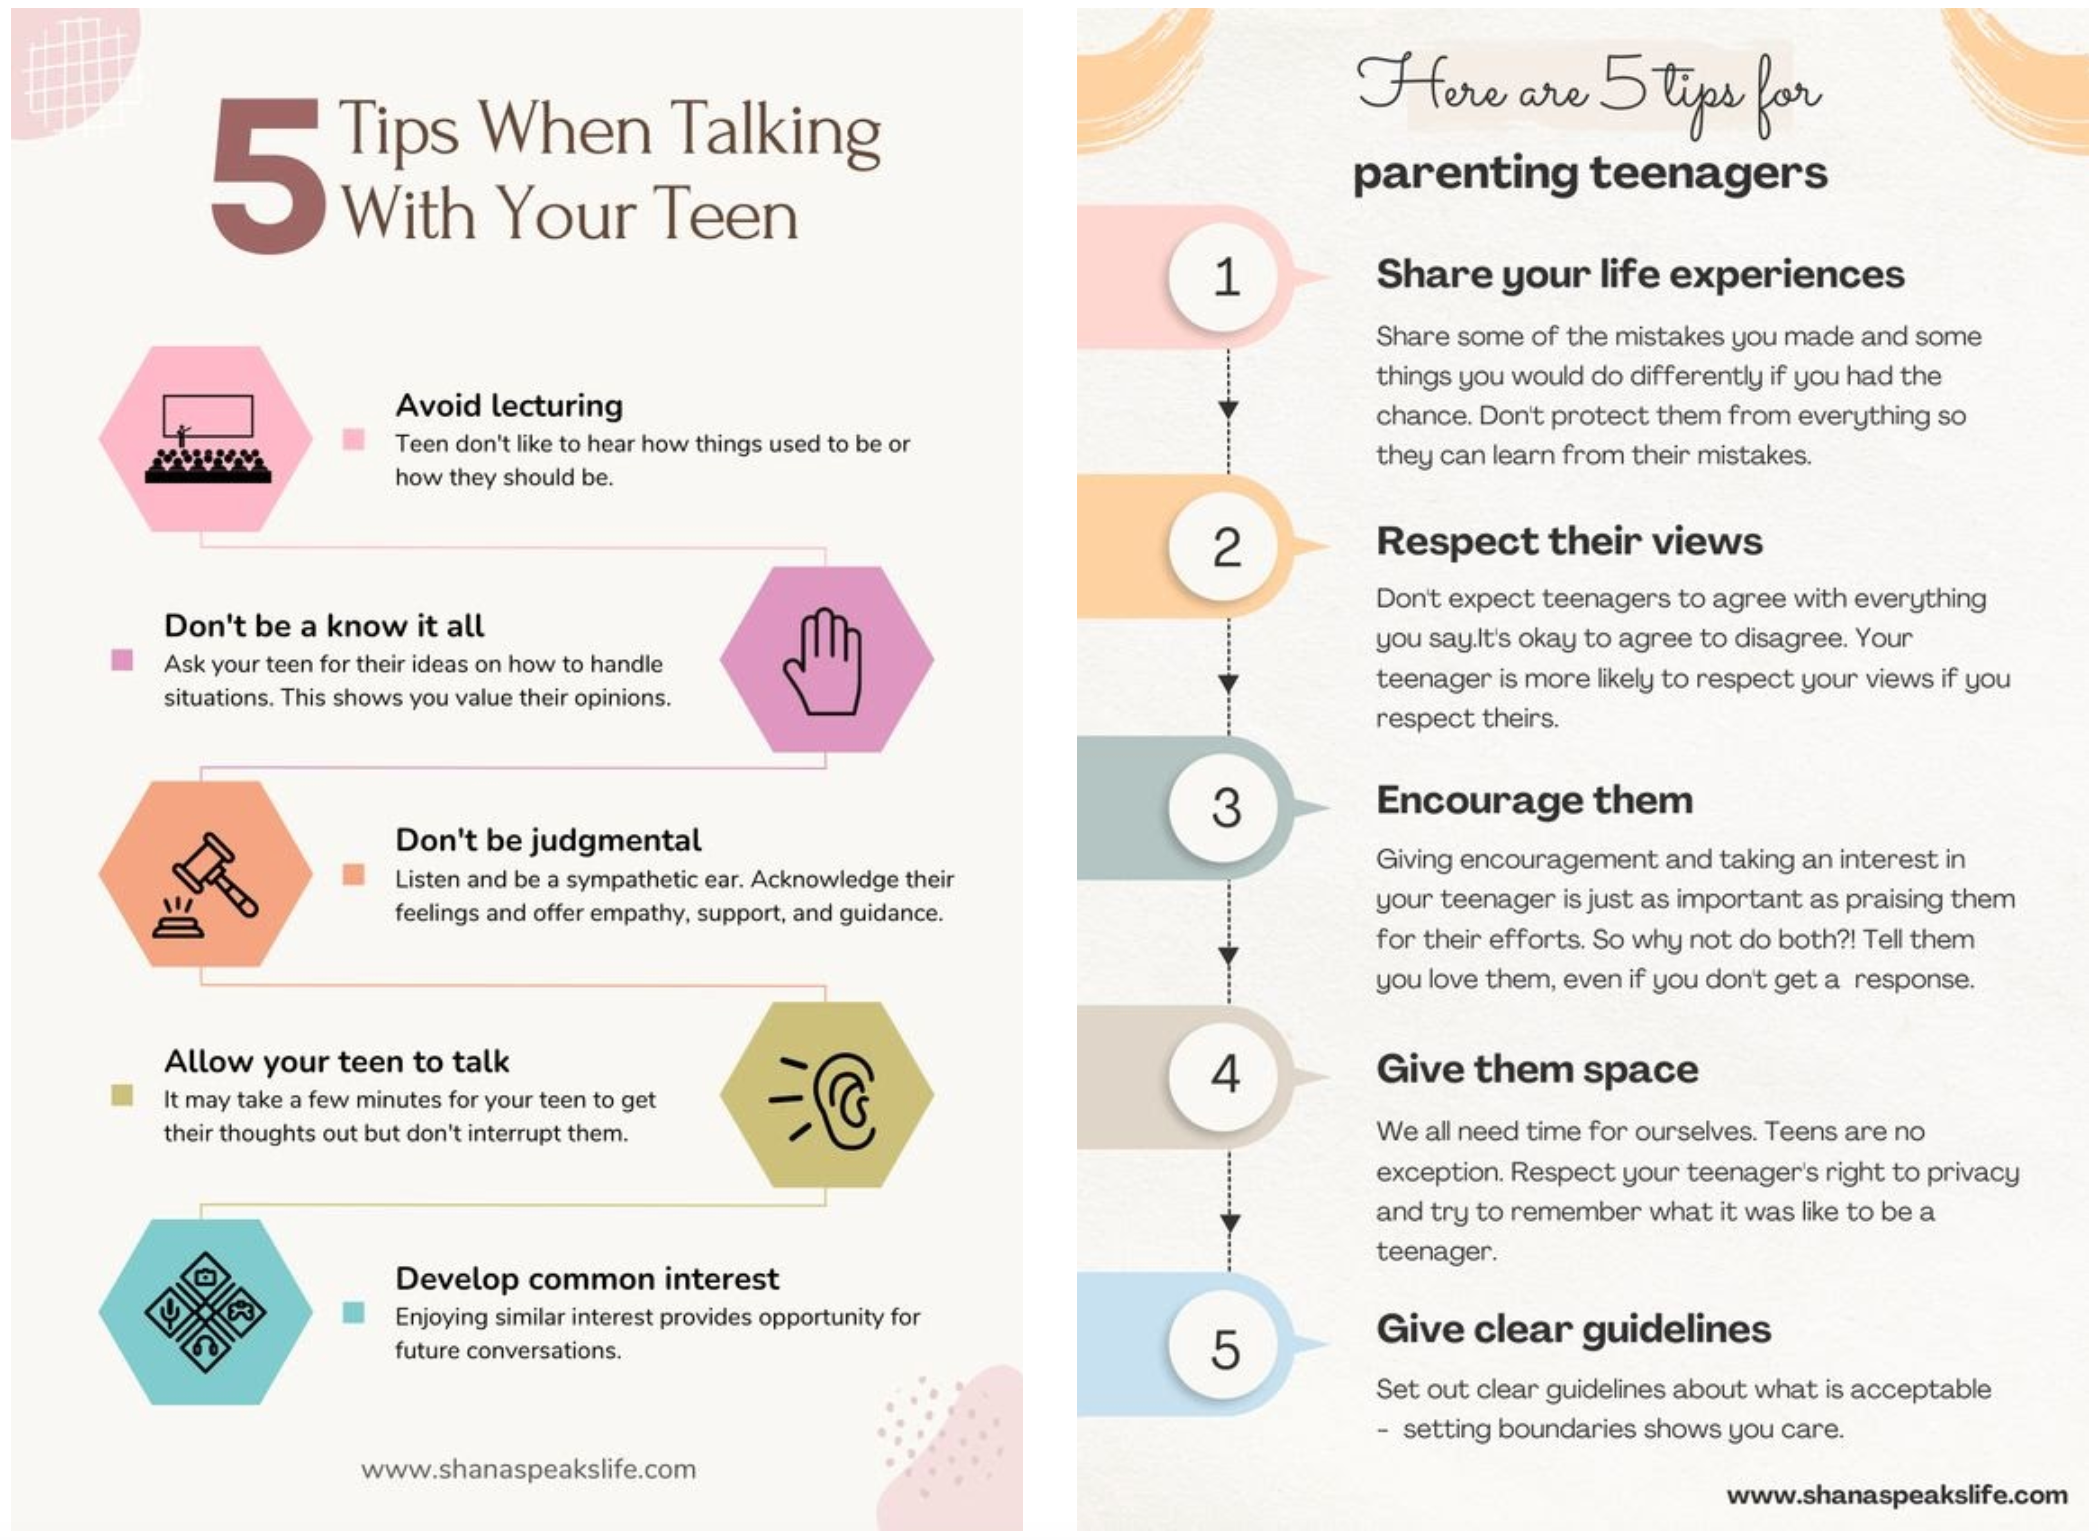 5 Tips for Talking with your Teen Infographic